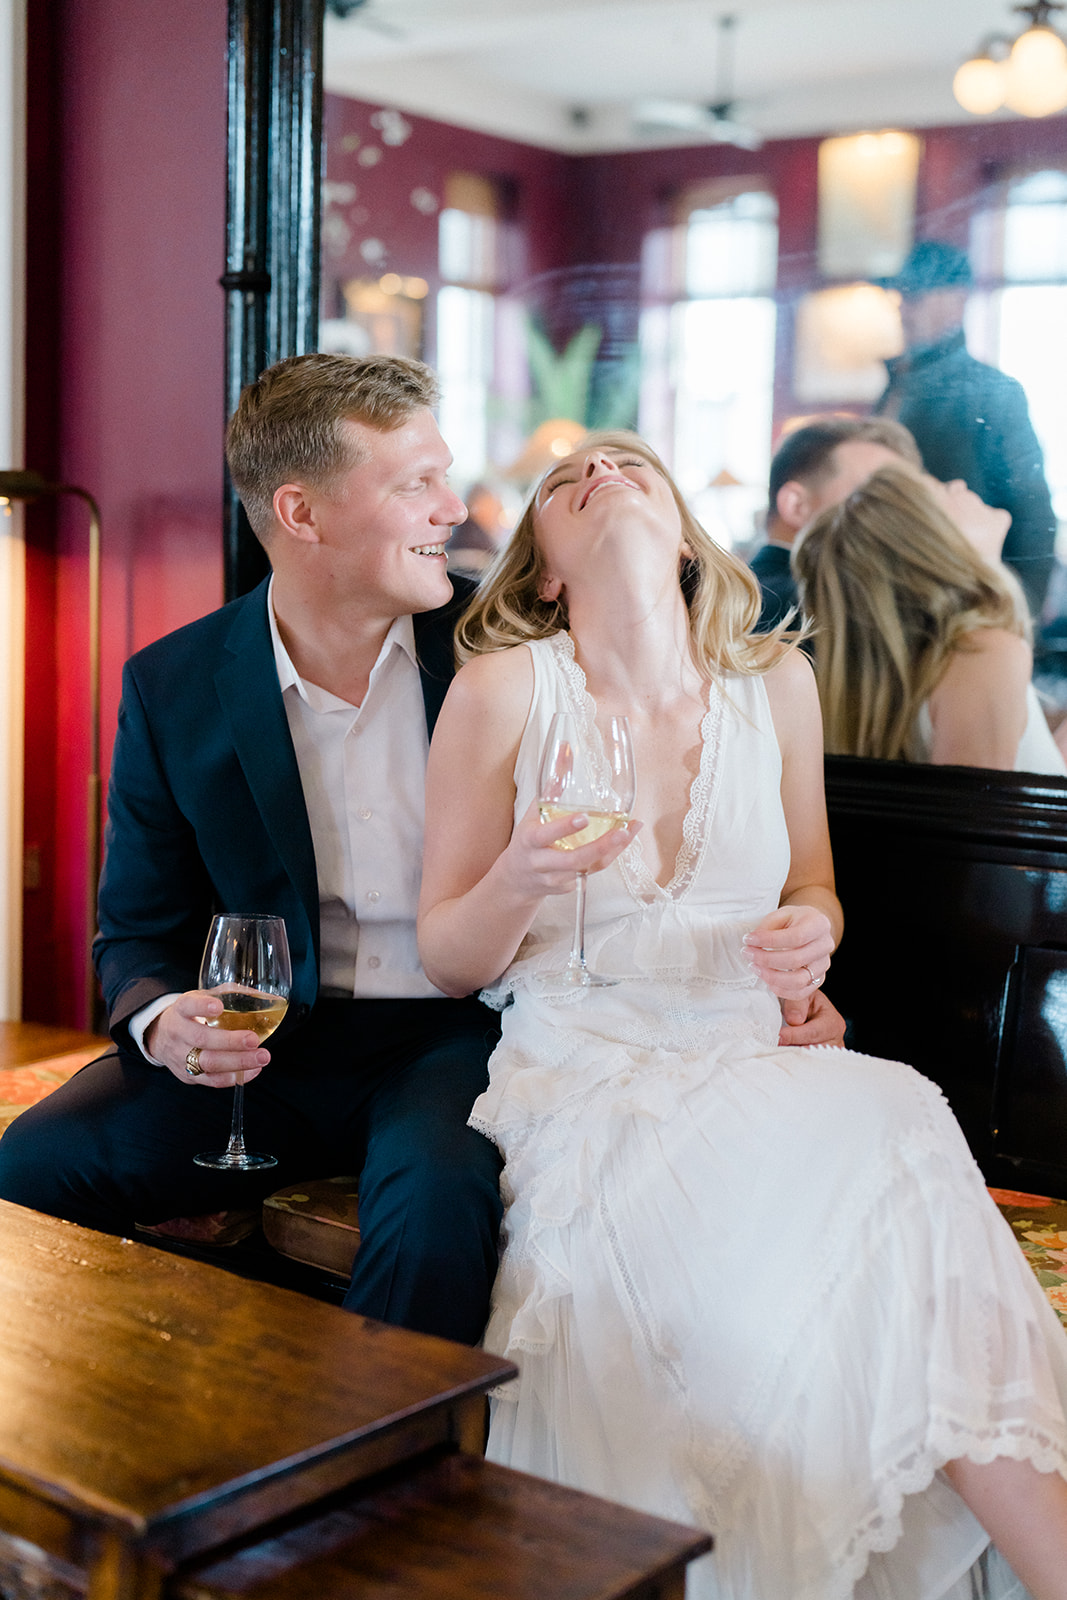 Newly engaged couple laughing and drinking wine in Congress Hall, Cape May, New Jersey